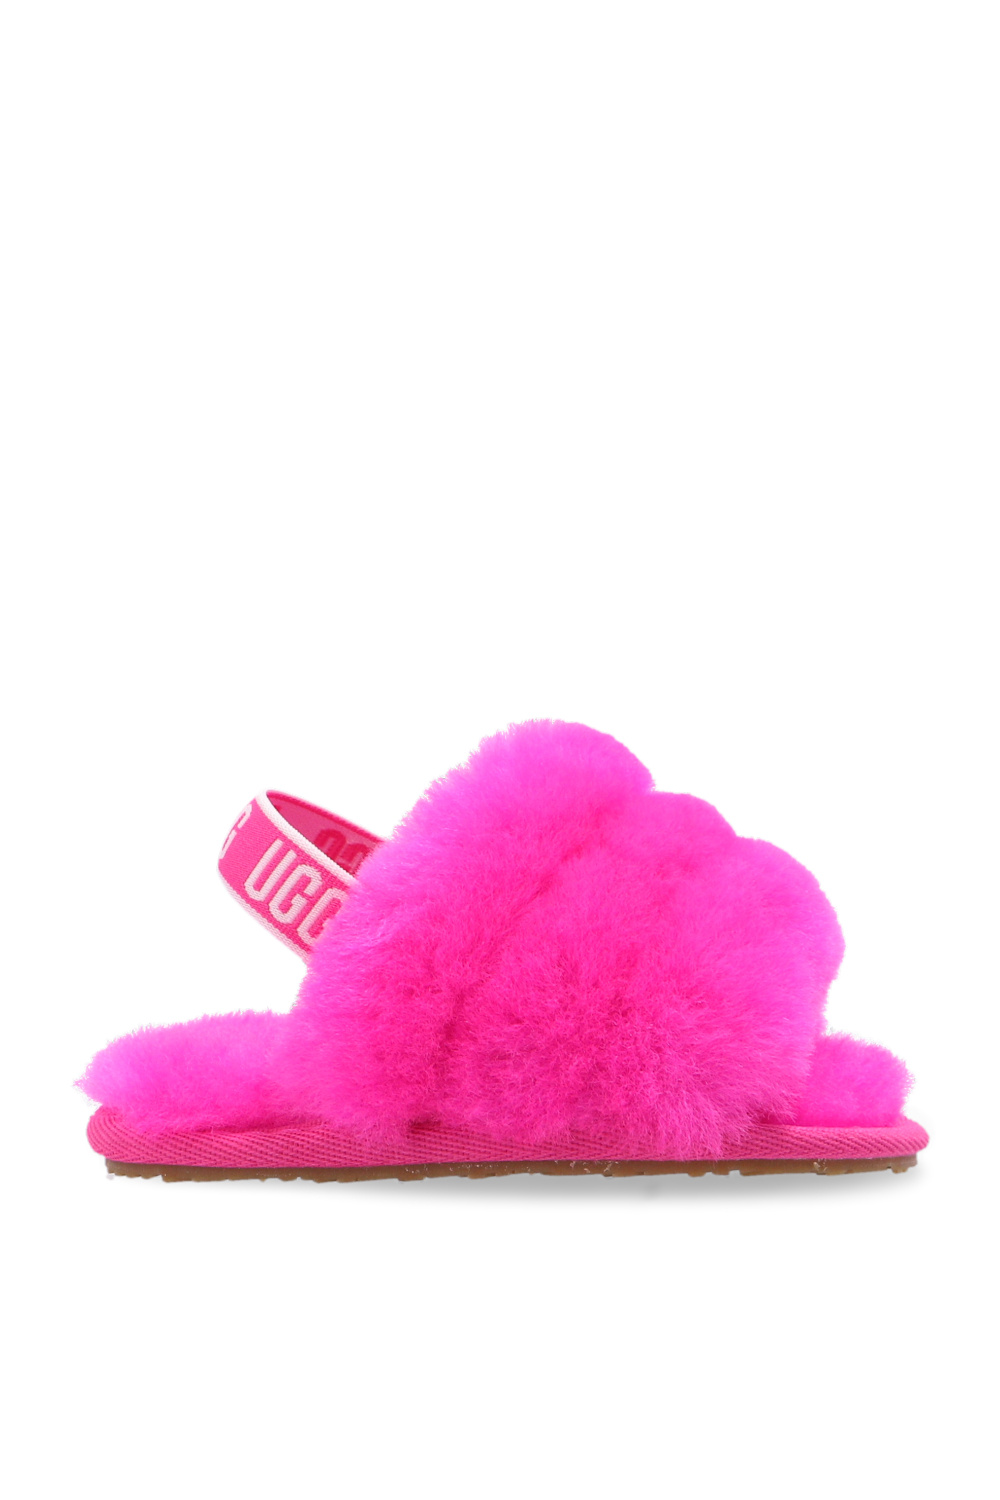 UGG Kids ‘Fluff Yeah’ low-top shoes and blanket set